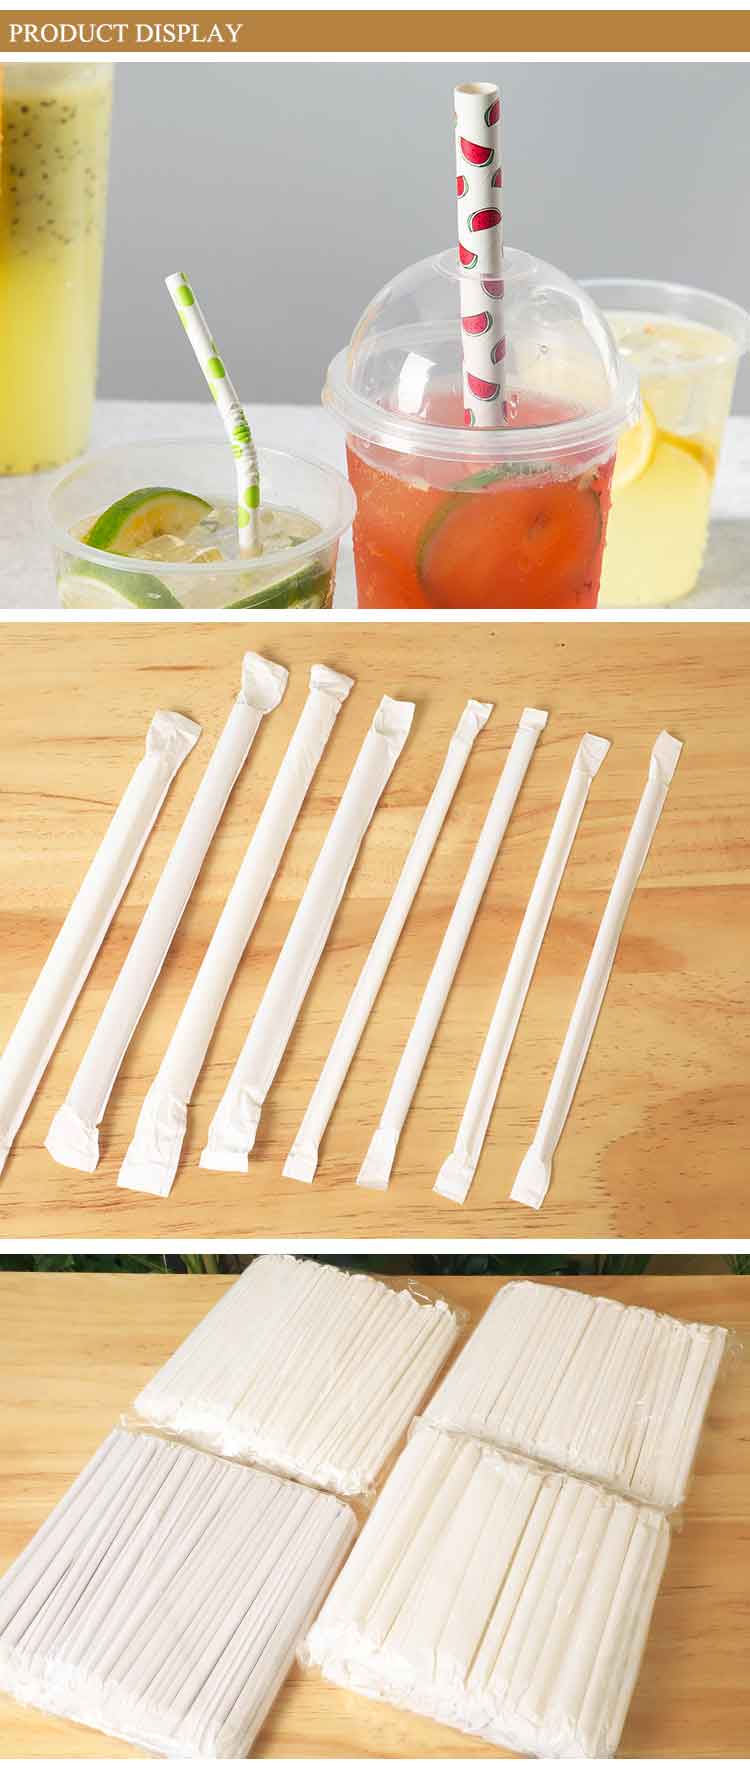 Disposable paper straws